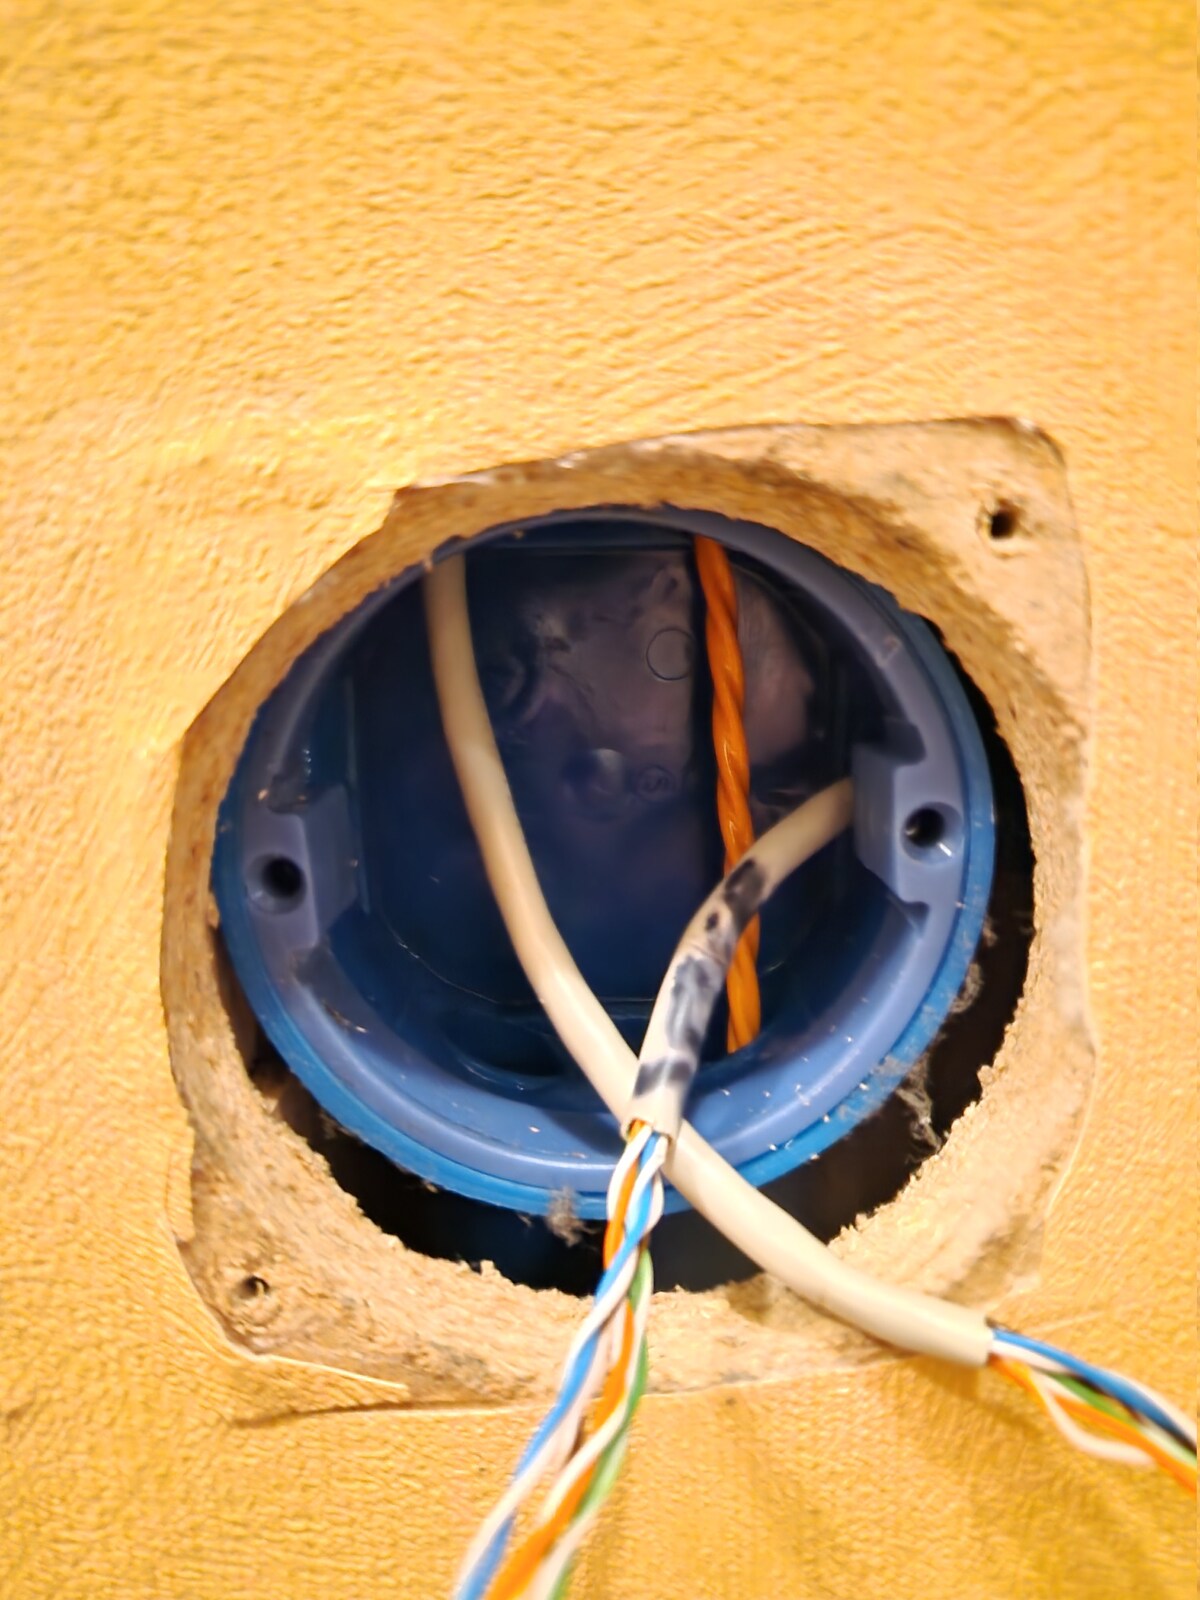 Pulling CAT6 cable in existing conduit :: Cavelab blog — Stories